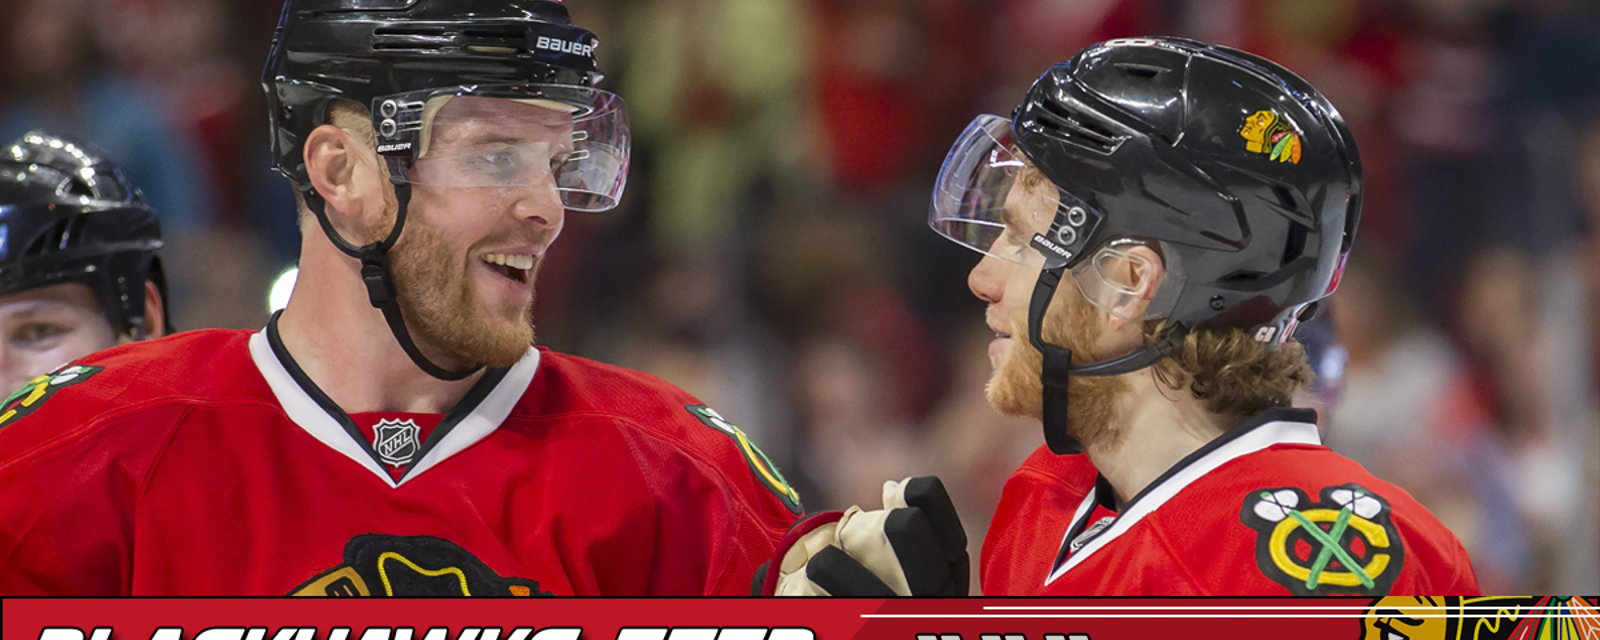 Former Blackhawks winger opens up about living with disease.